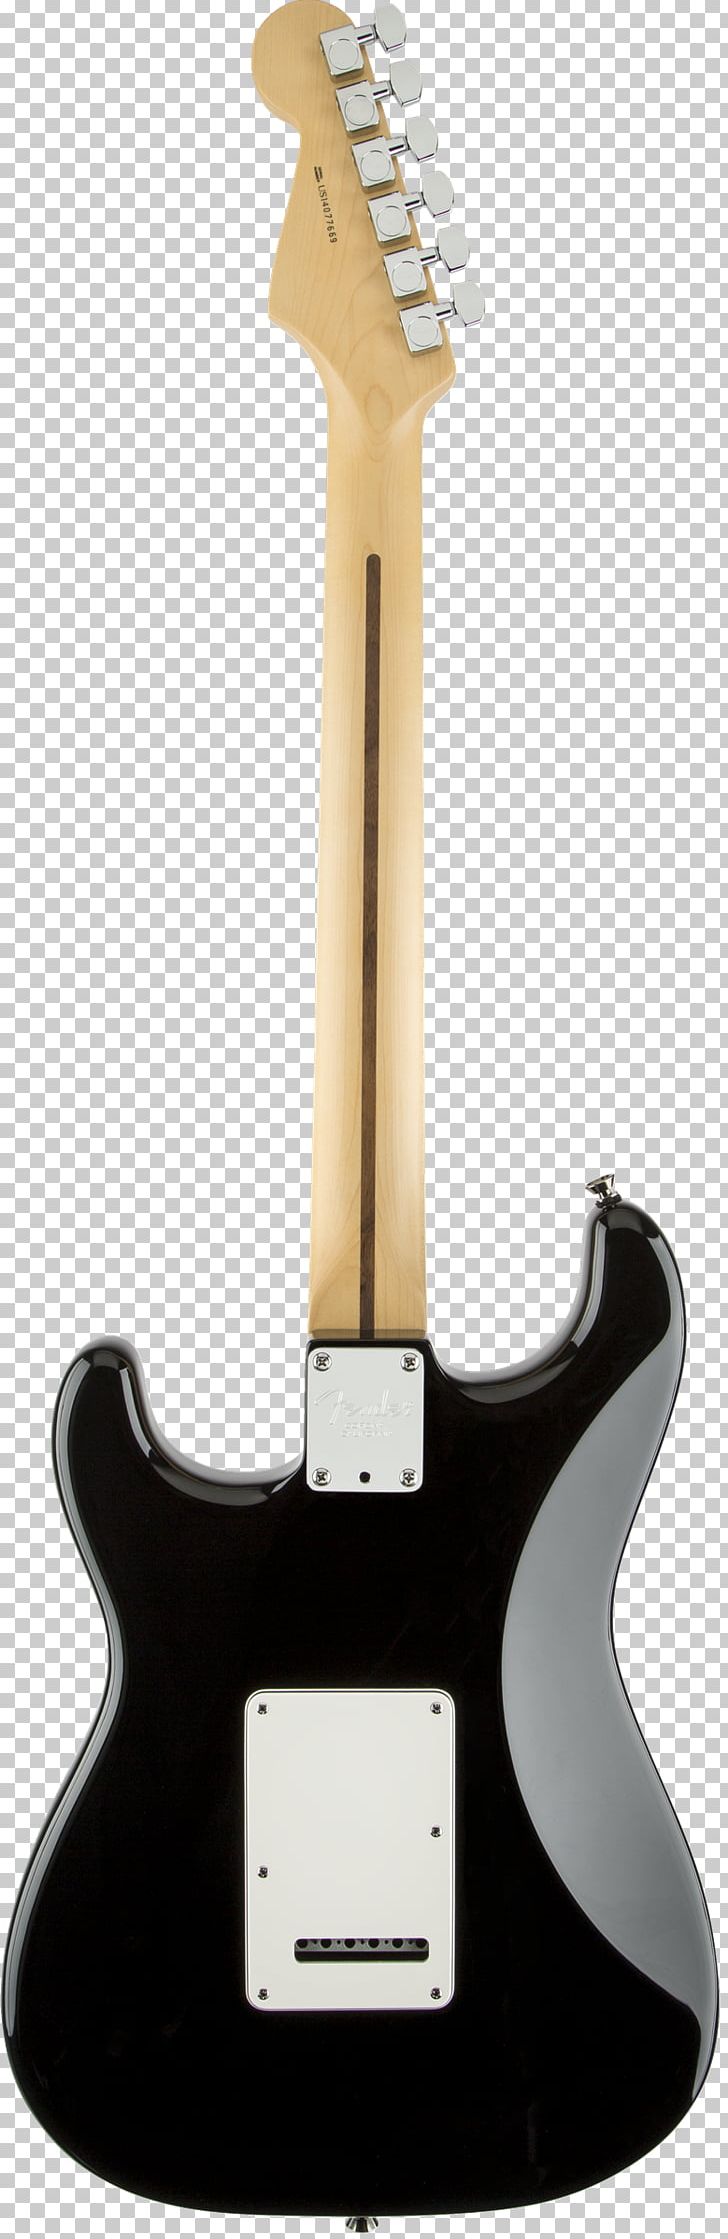 Fender Stratocaster Electric Guitar Fender Musical Instruments Corporation Squier Deluxe Hot Rails Stratocaster PNG, Clipart, Bass Guitar, Electric Guitar, Electronic , Fender Stratocaster, Fingerboard Free PNG Download